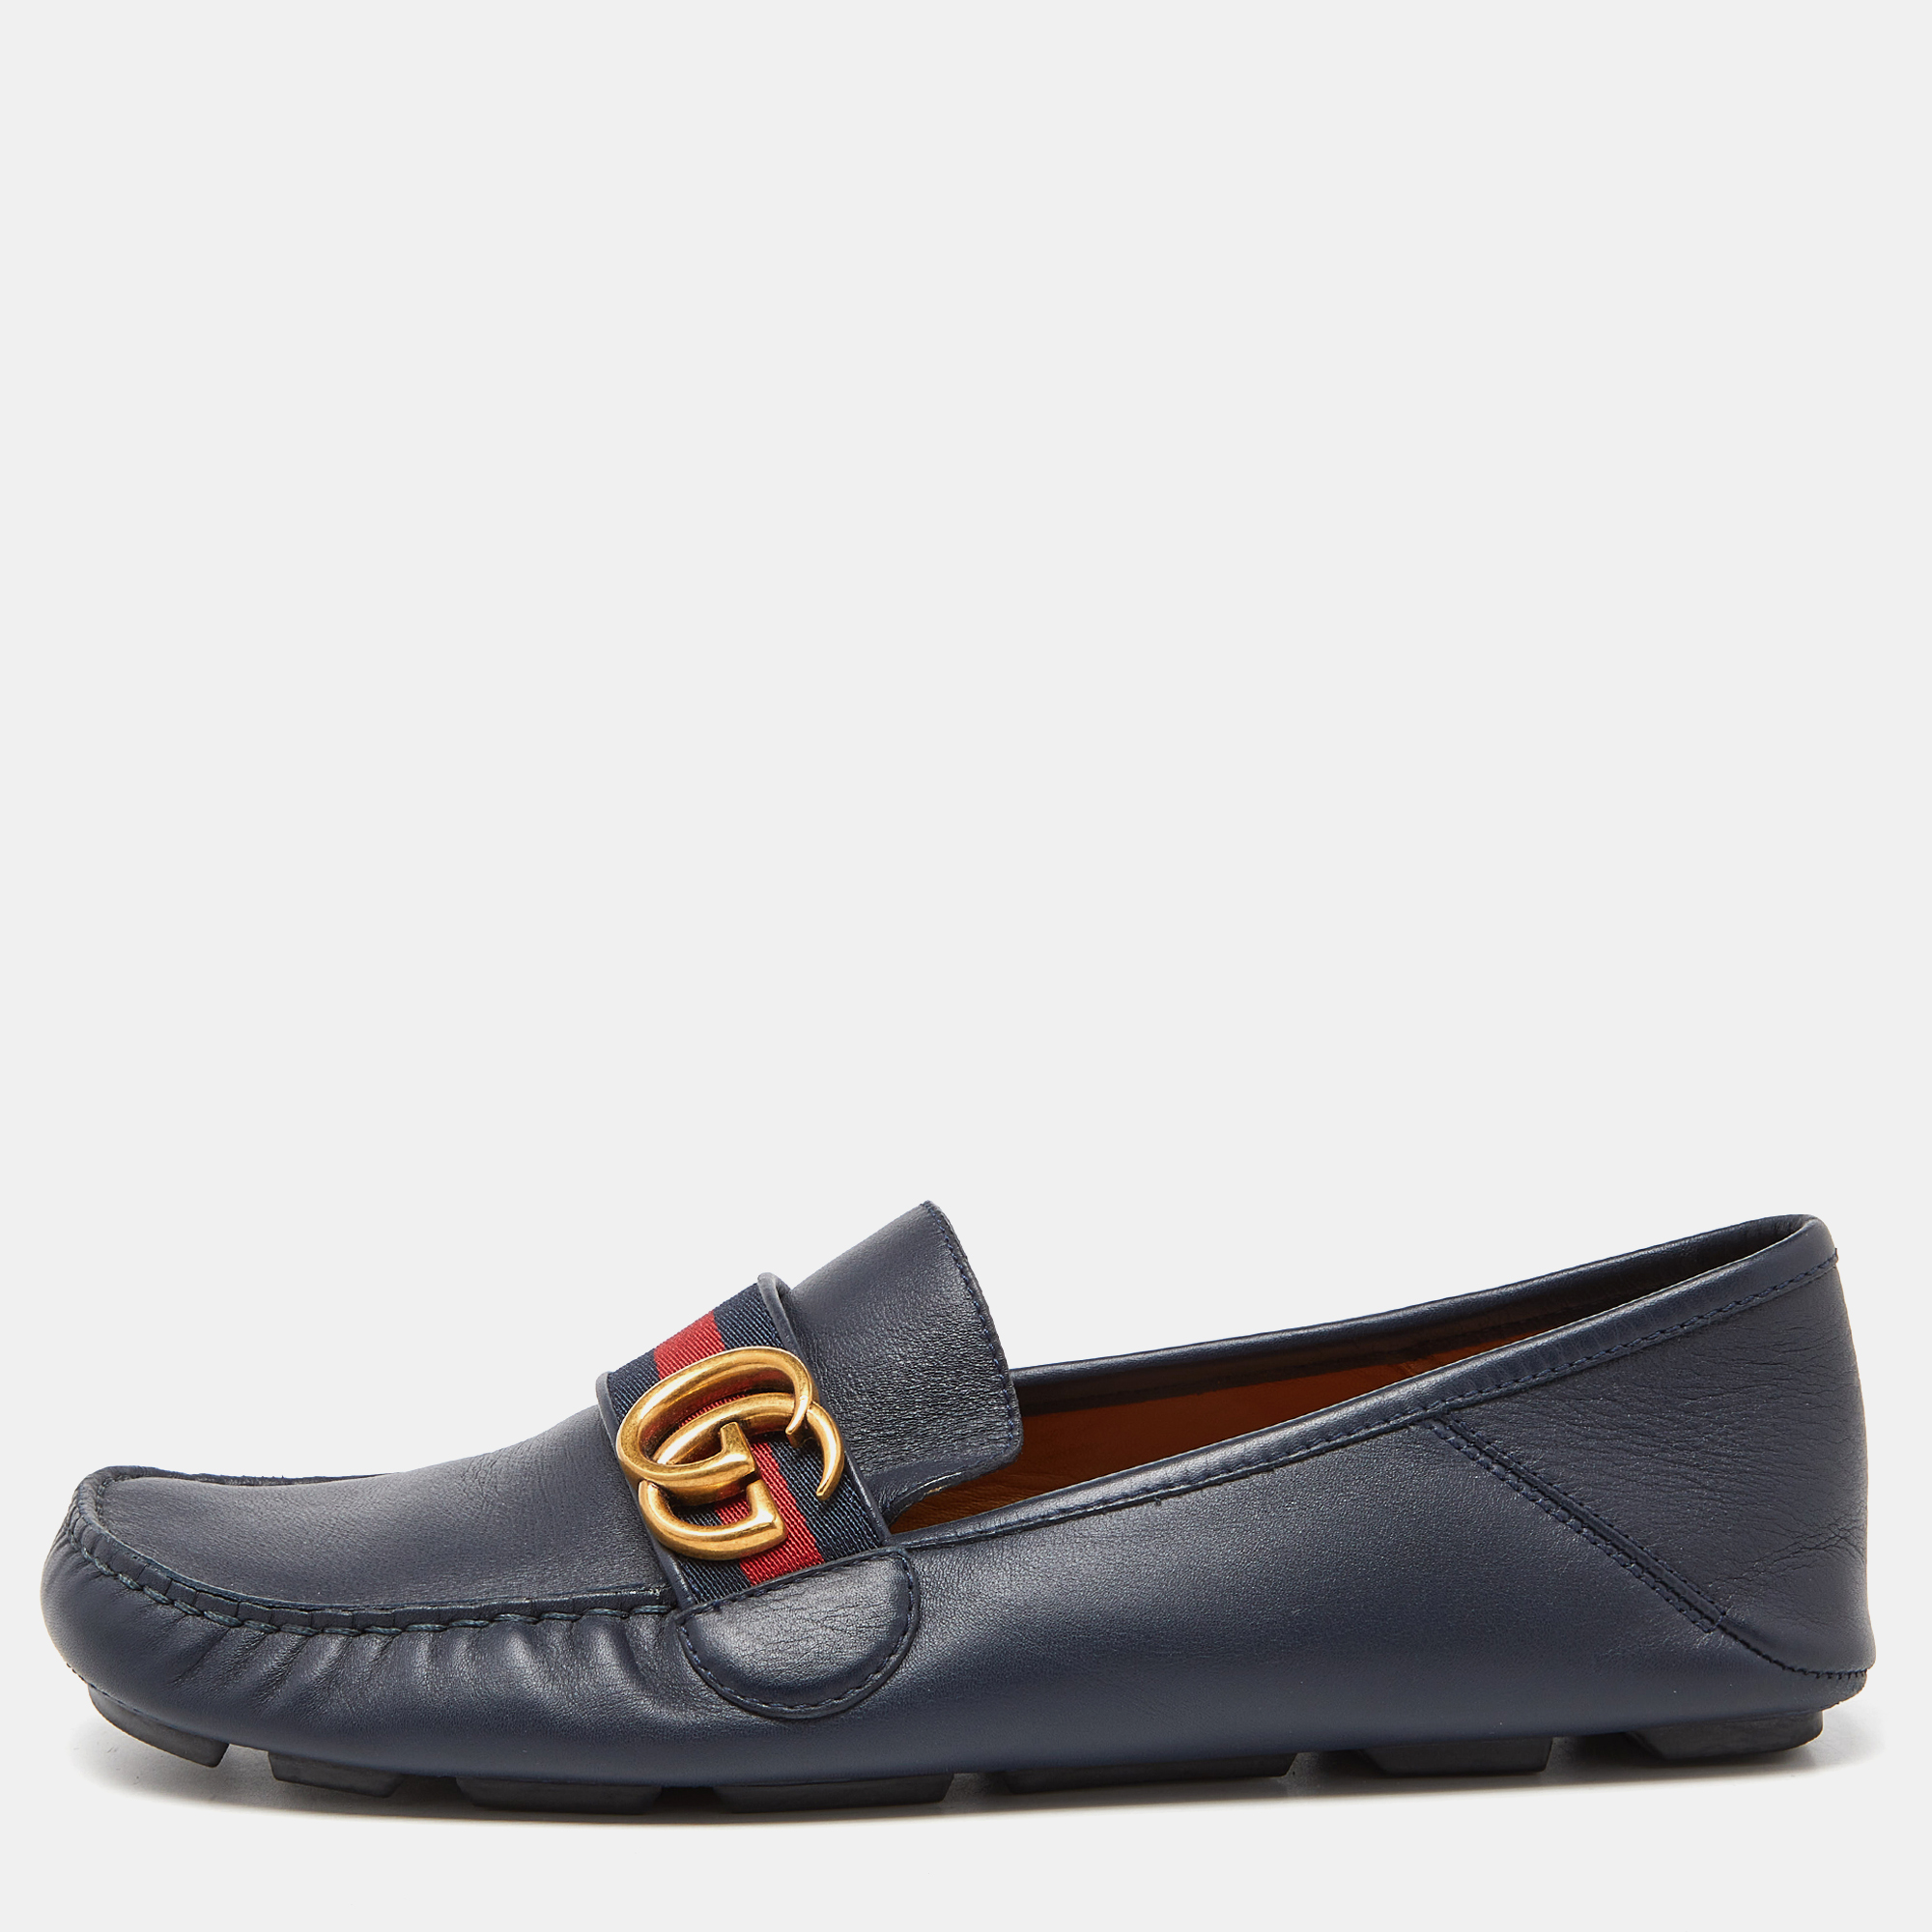 Gucci Blue Leather Web Horsebit Loafers Size 41